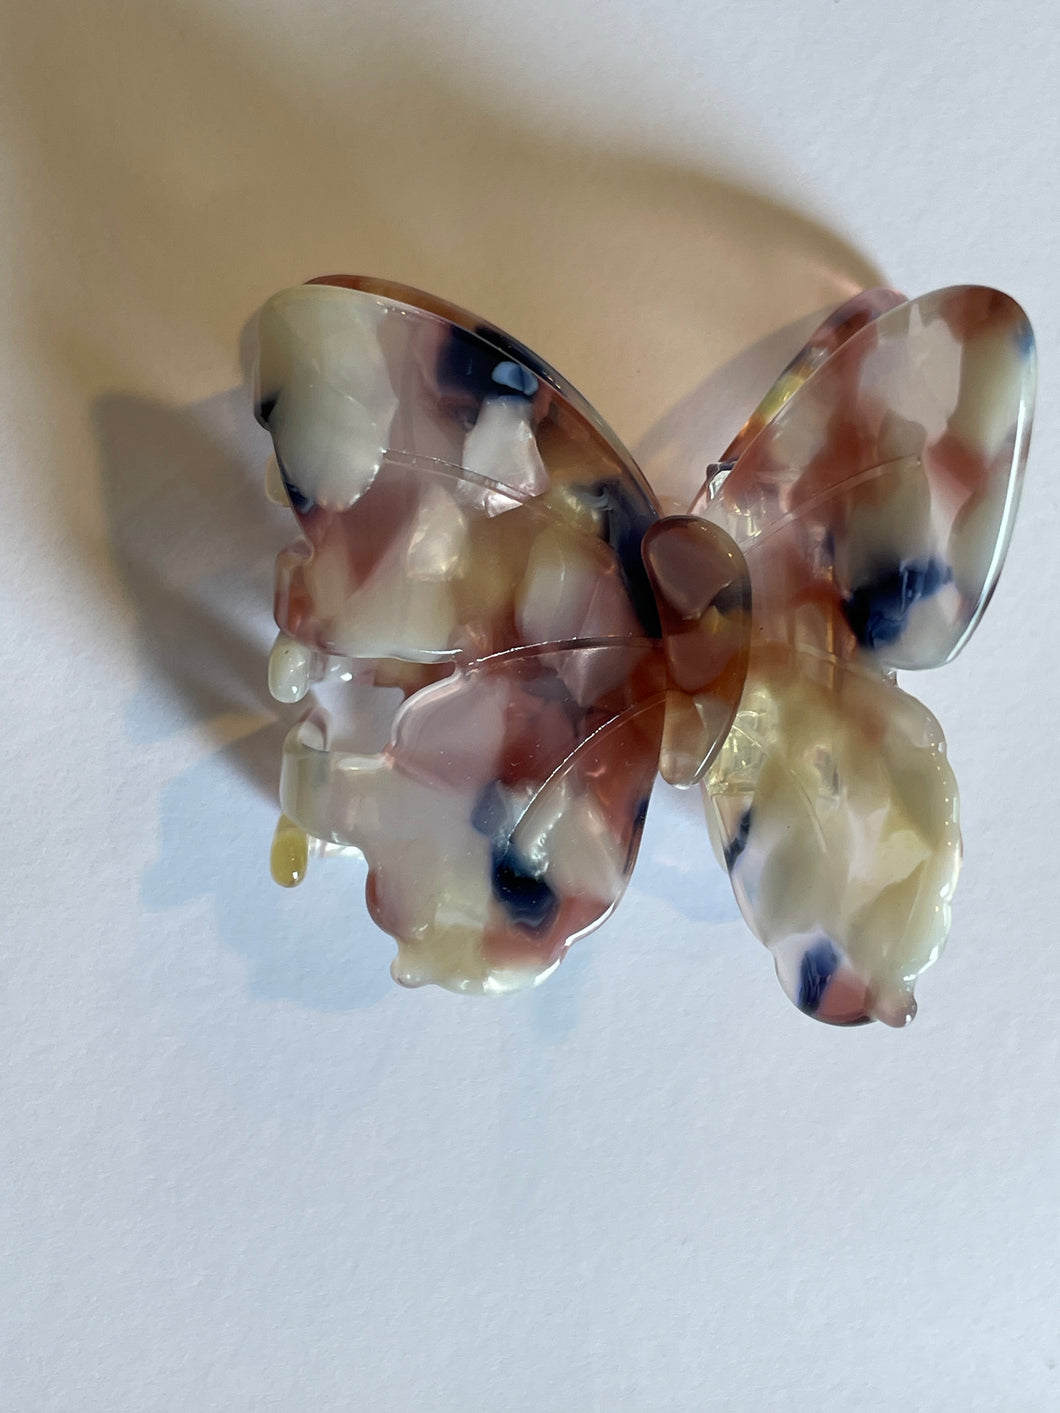 Butterfly claw clip